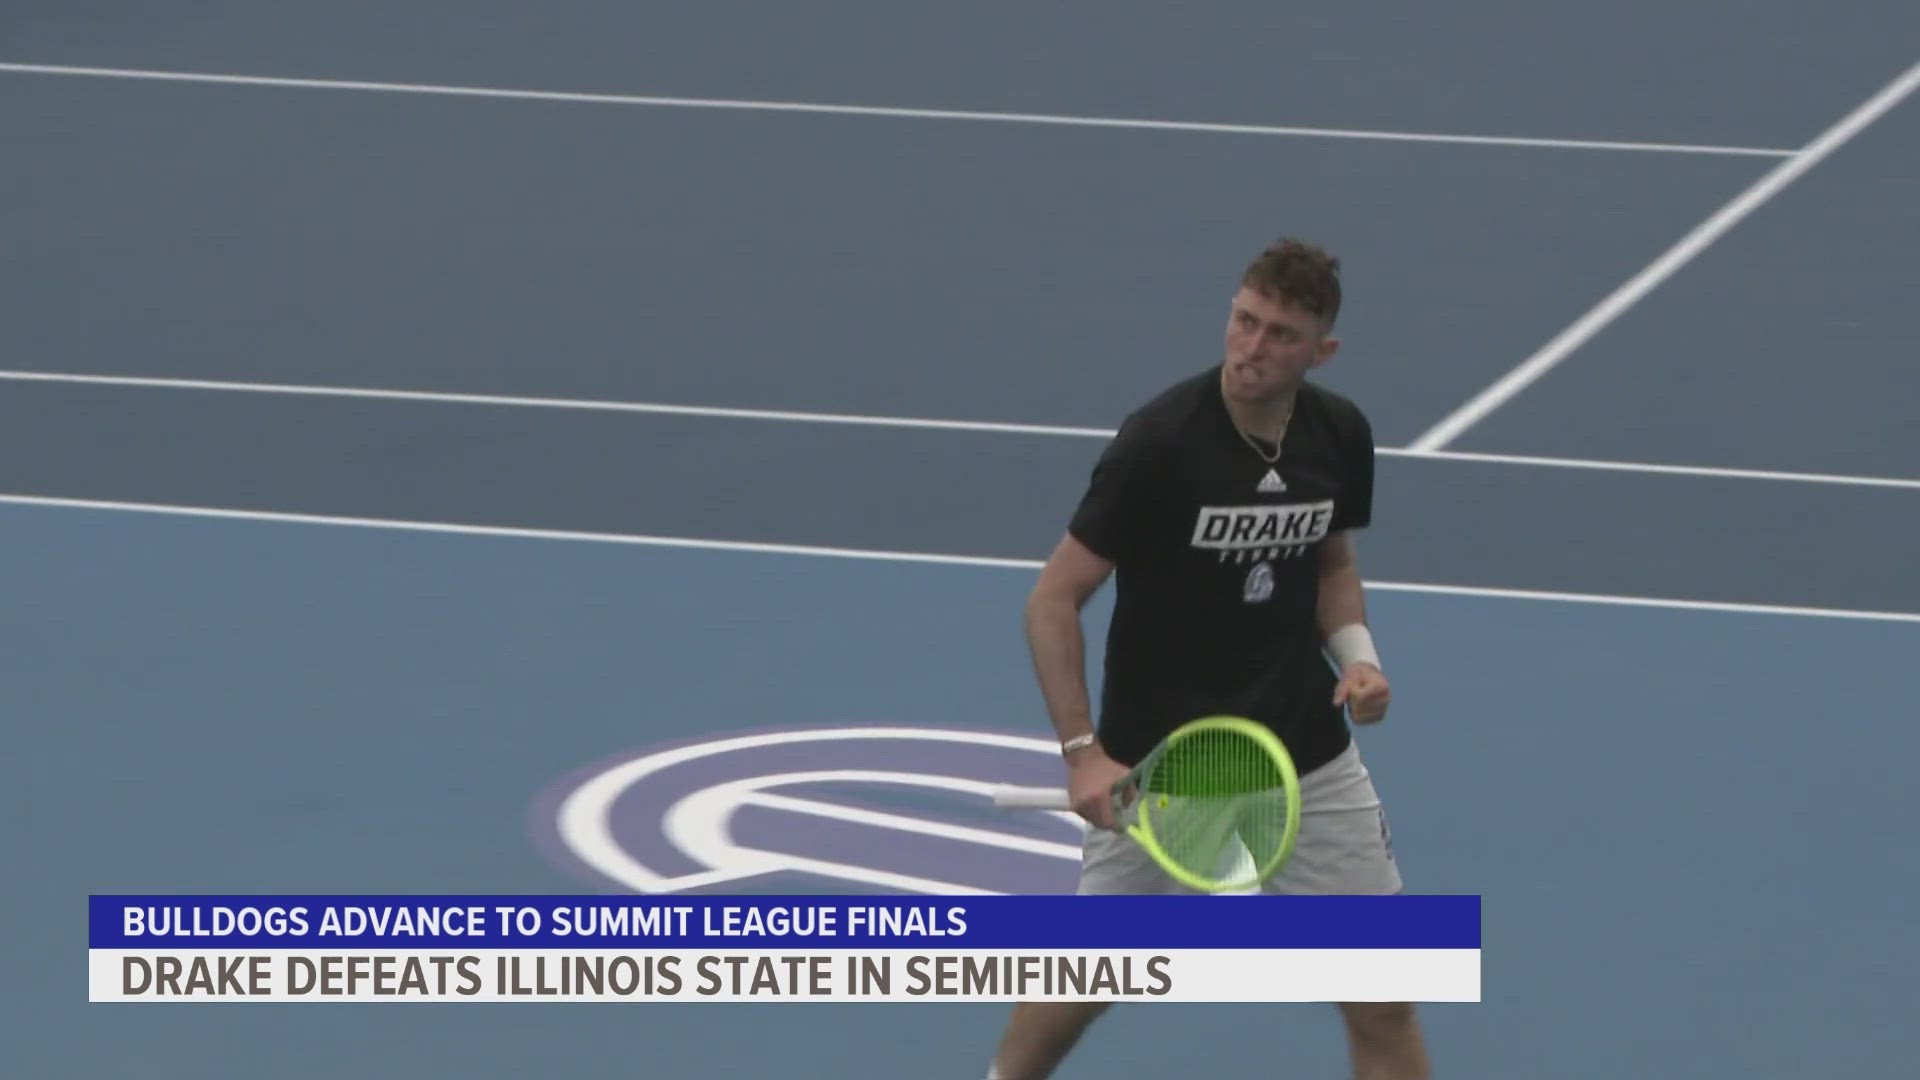 The Drake men's tennis team defeated Illinois State in the Summit League semifinals. The Bulldogs will play for their third straight conference title.